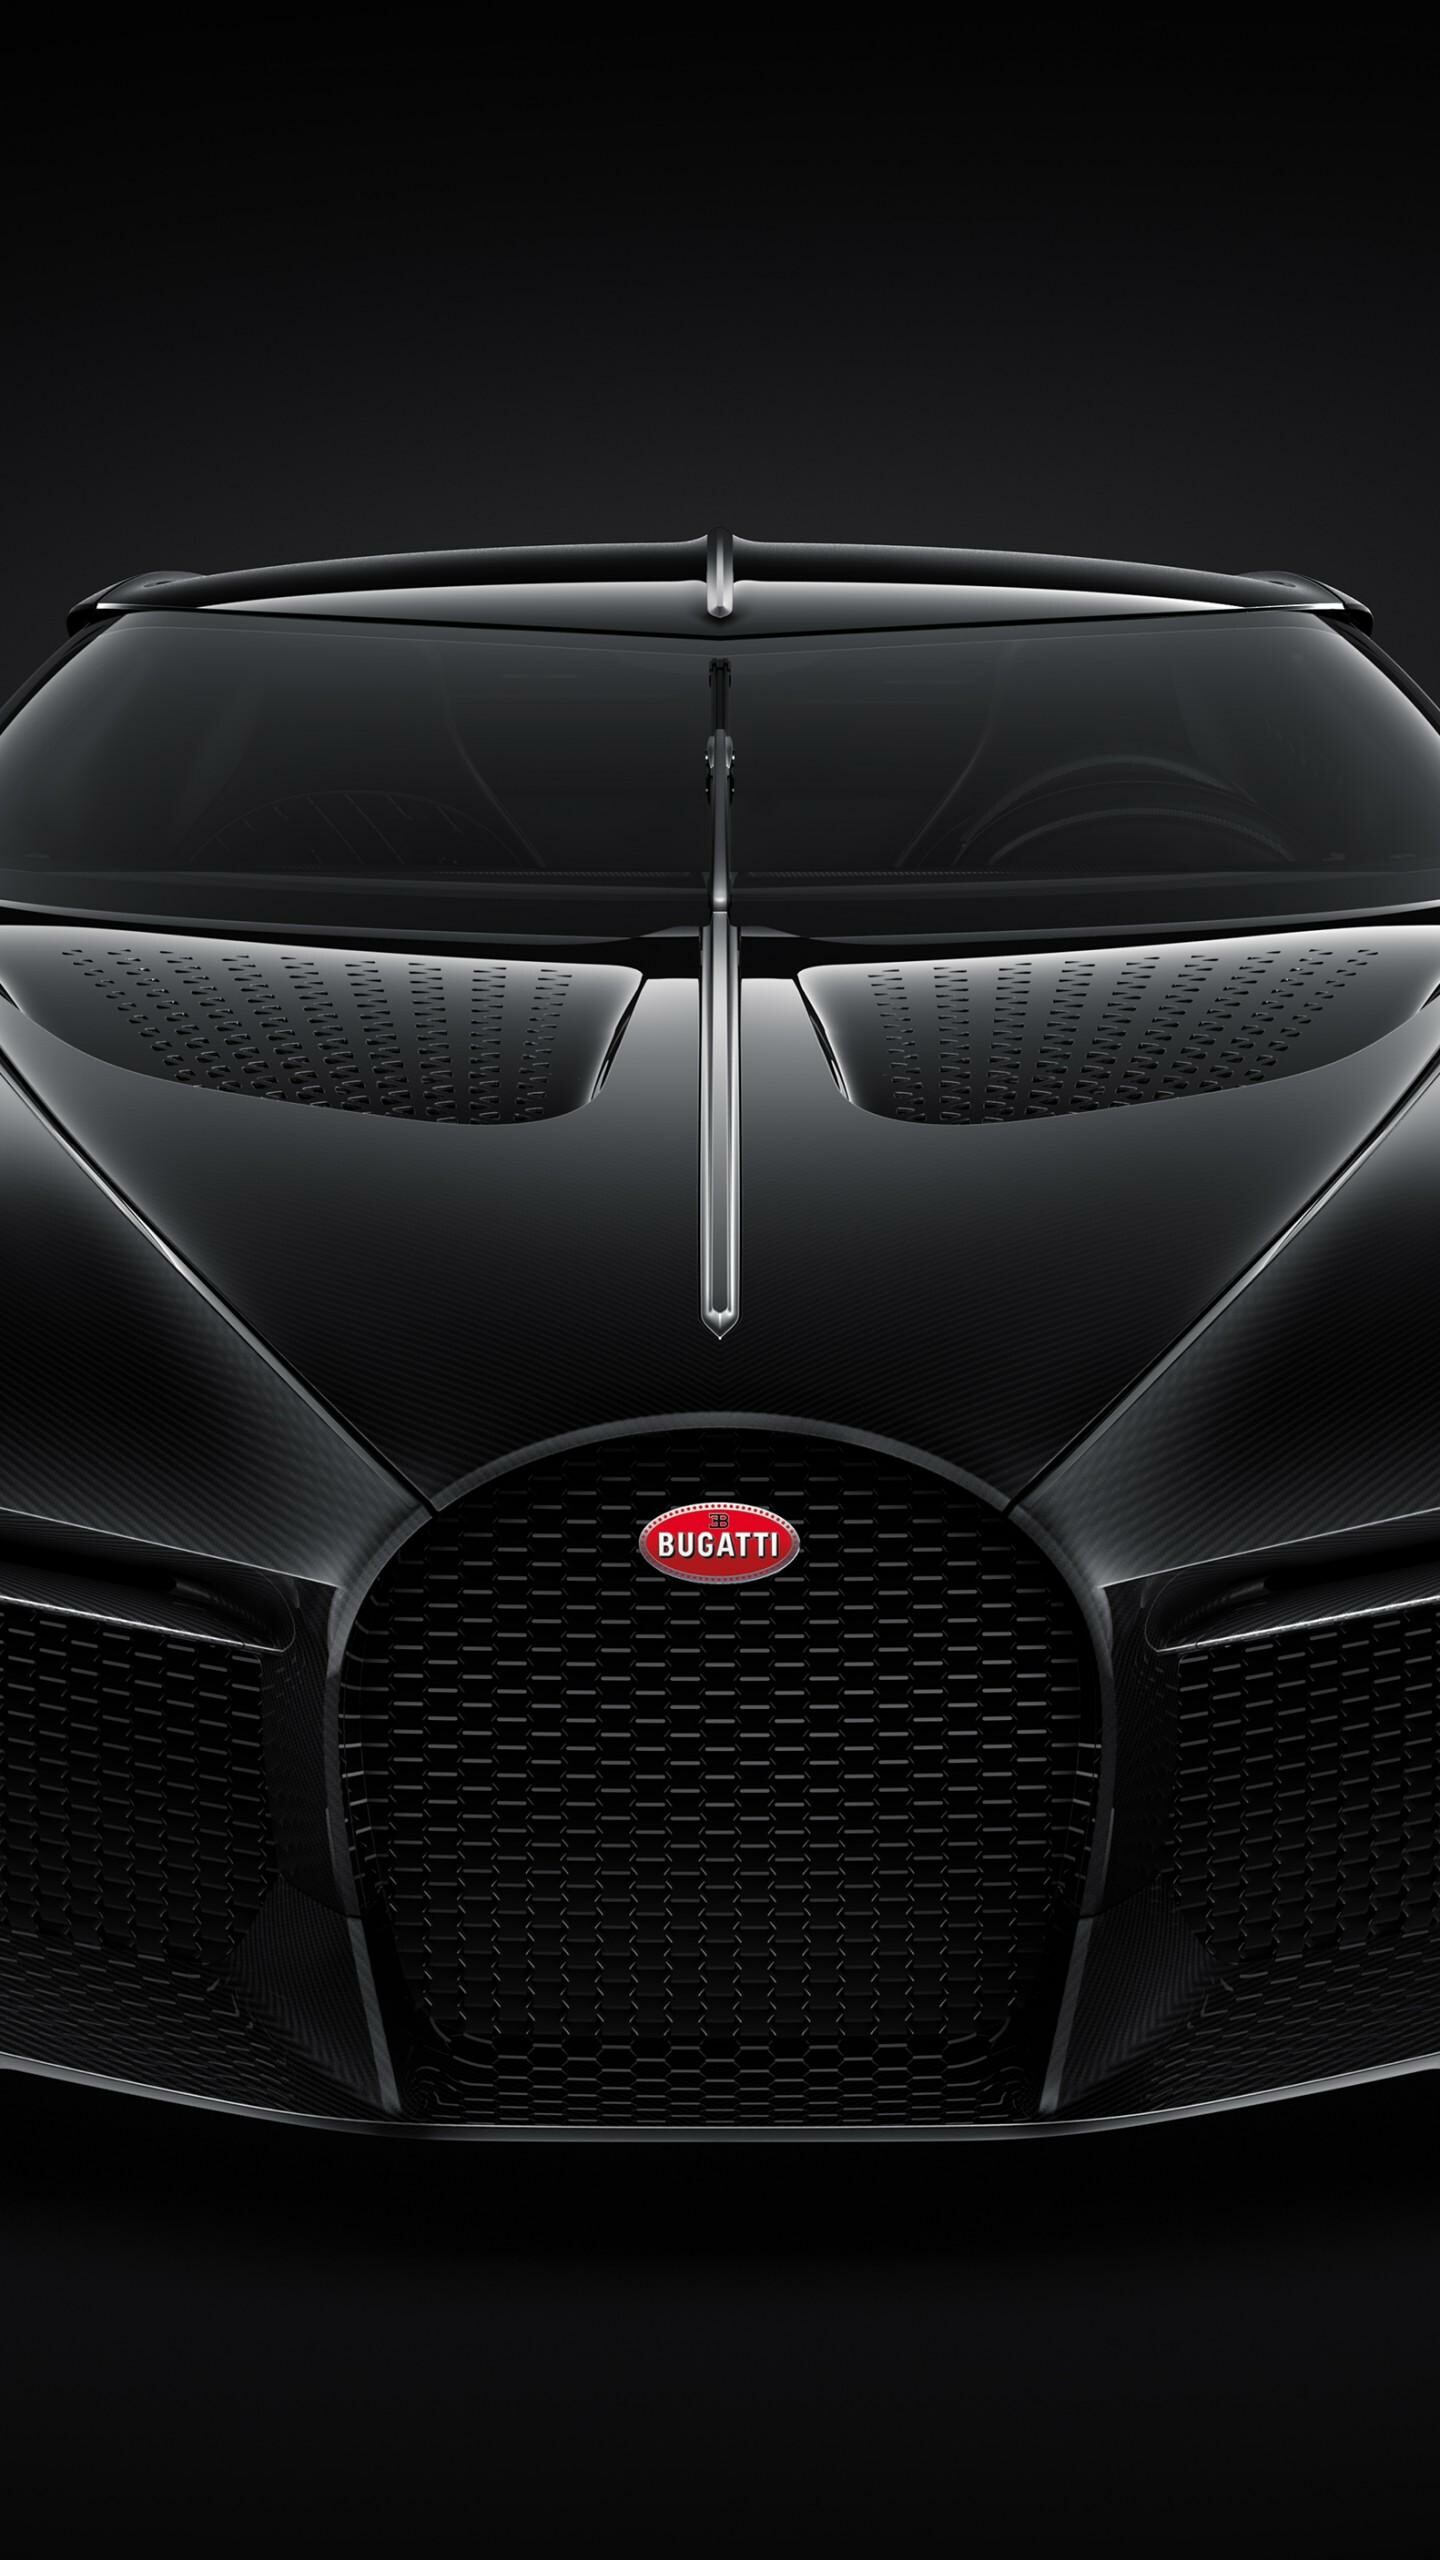 Bugatti La Voiture Noire: The car is inspired by the Veyron 16.4 (2005), Chiron (2016), and Divo (2018). 1440x2560 HD Background.